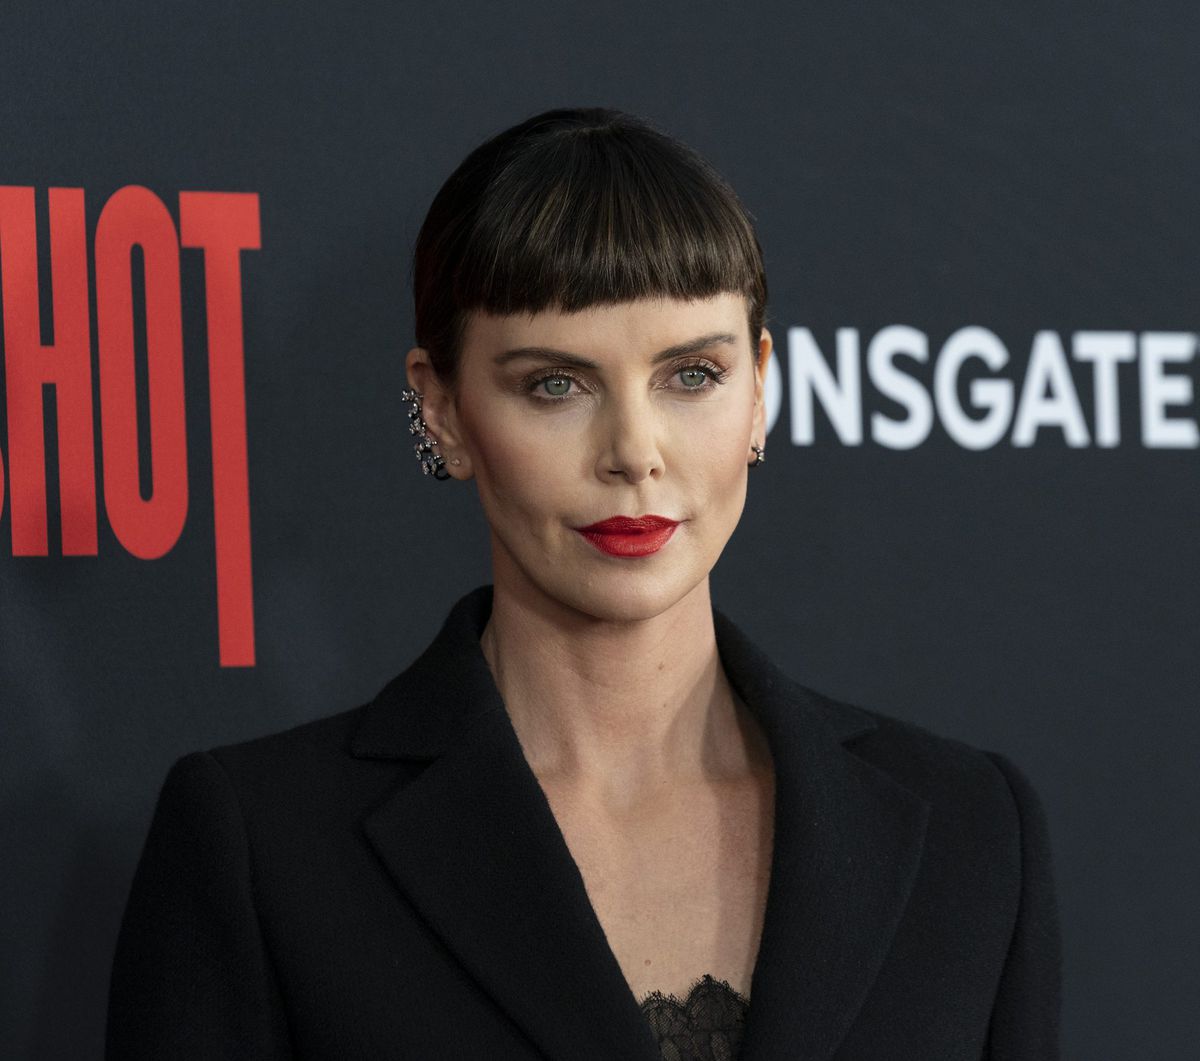 Charlize Theron attends premiere of Long Shot at AMC Lincoln...